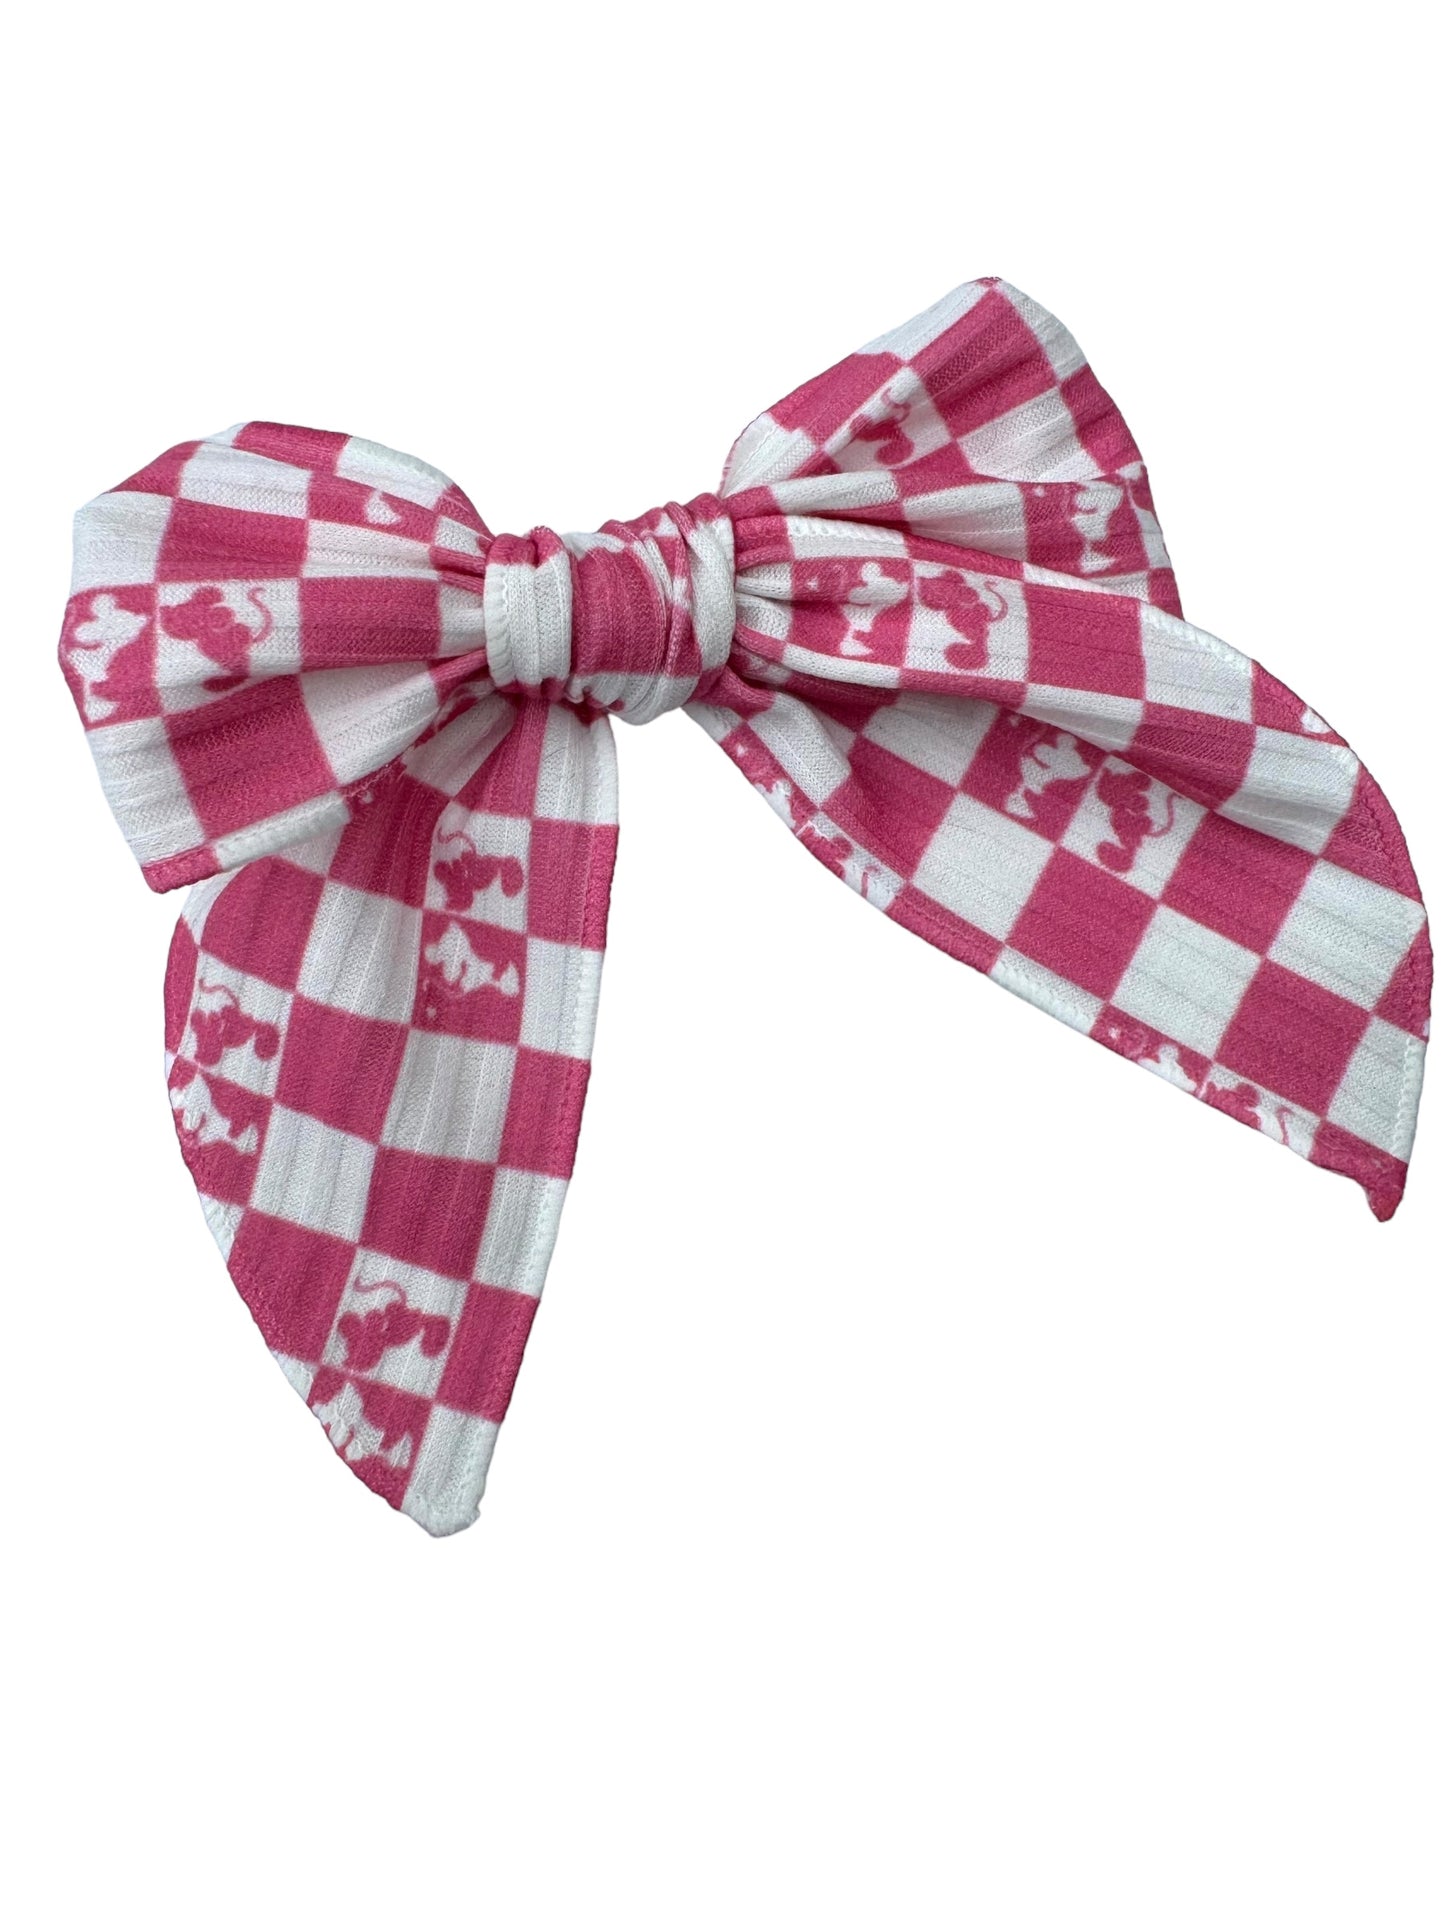 Pink Mouse Kiss Hair Bow